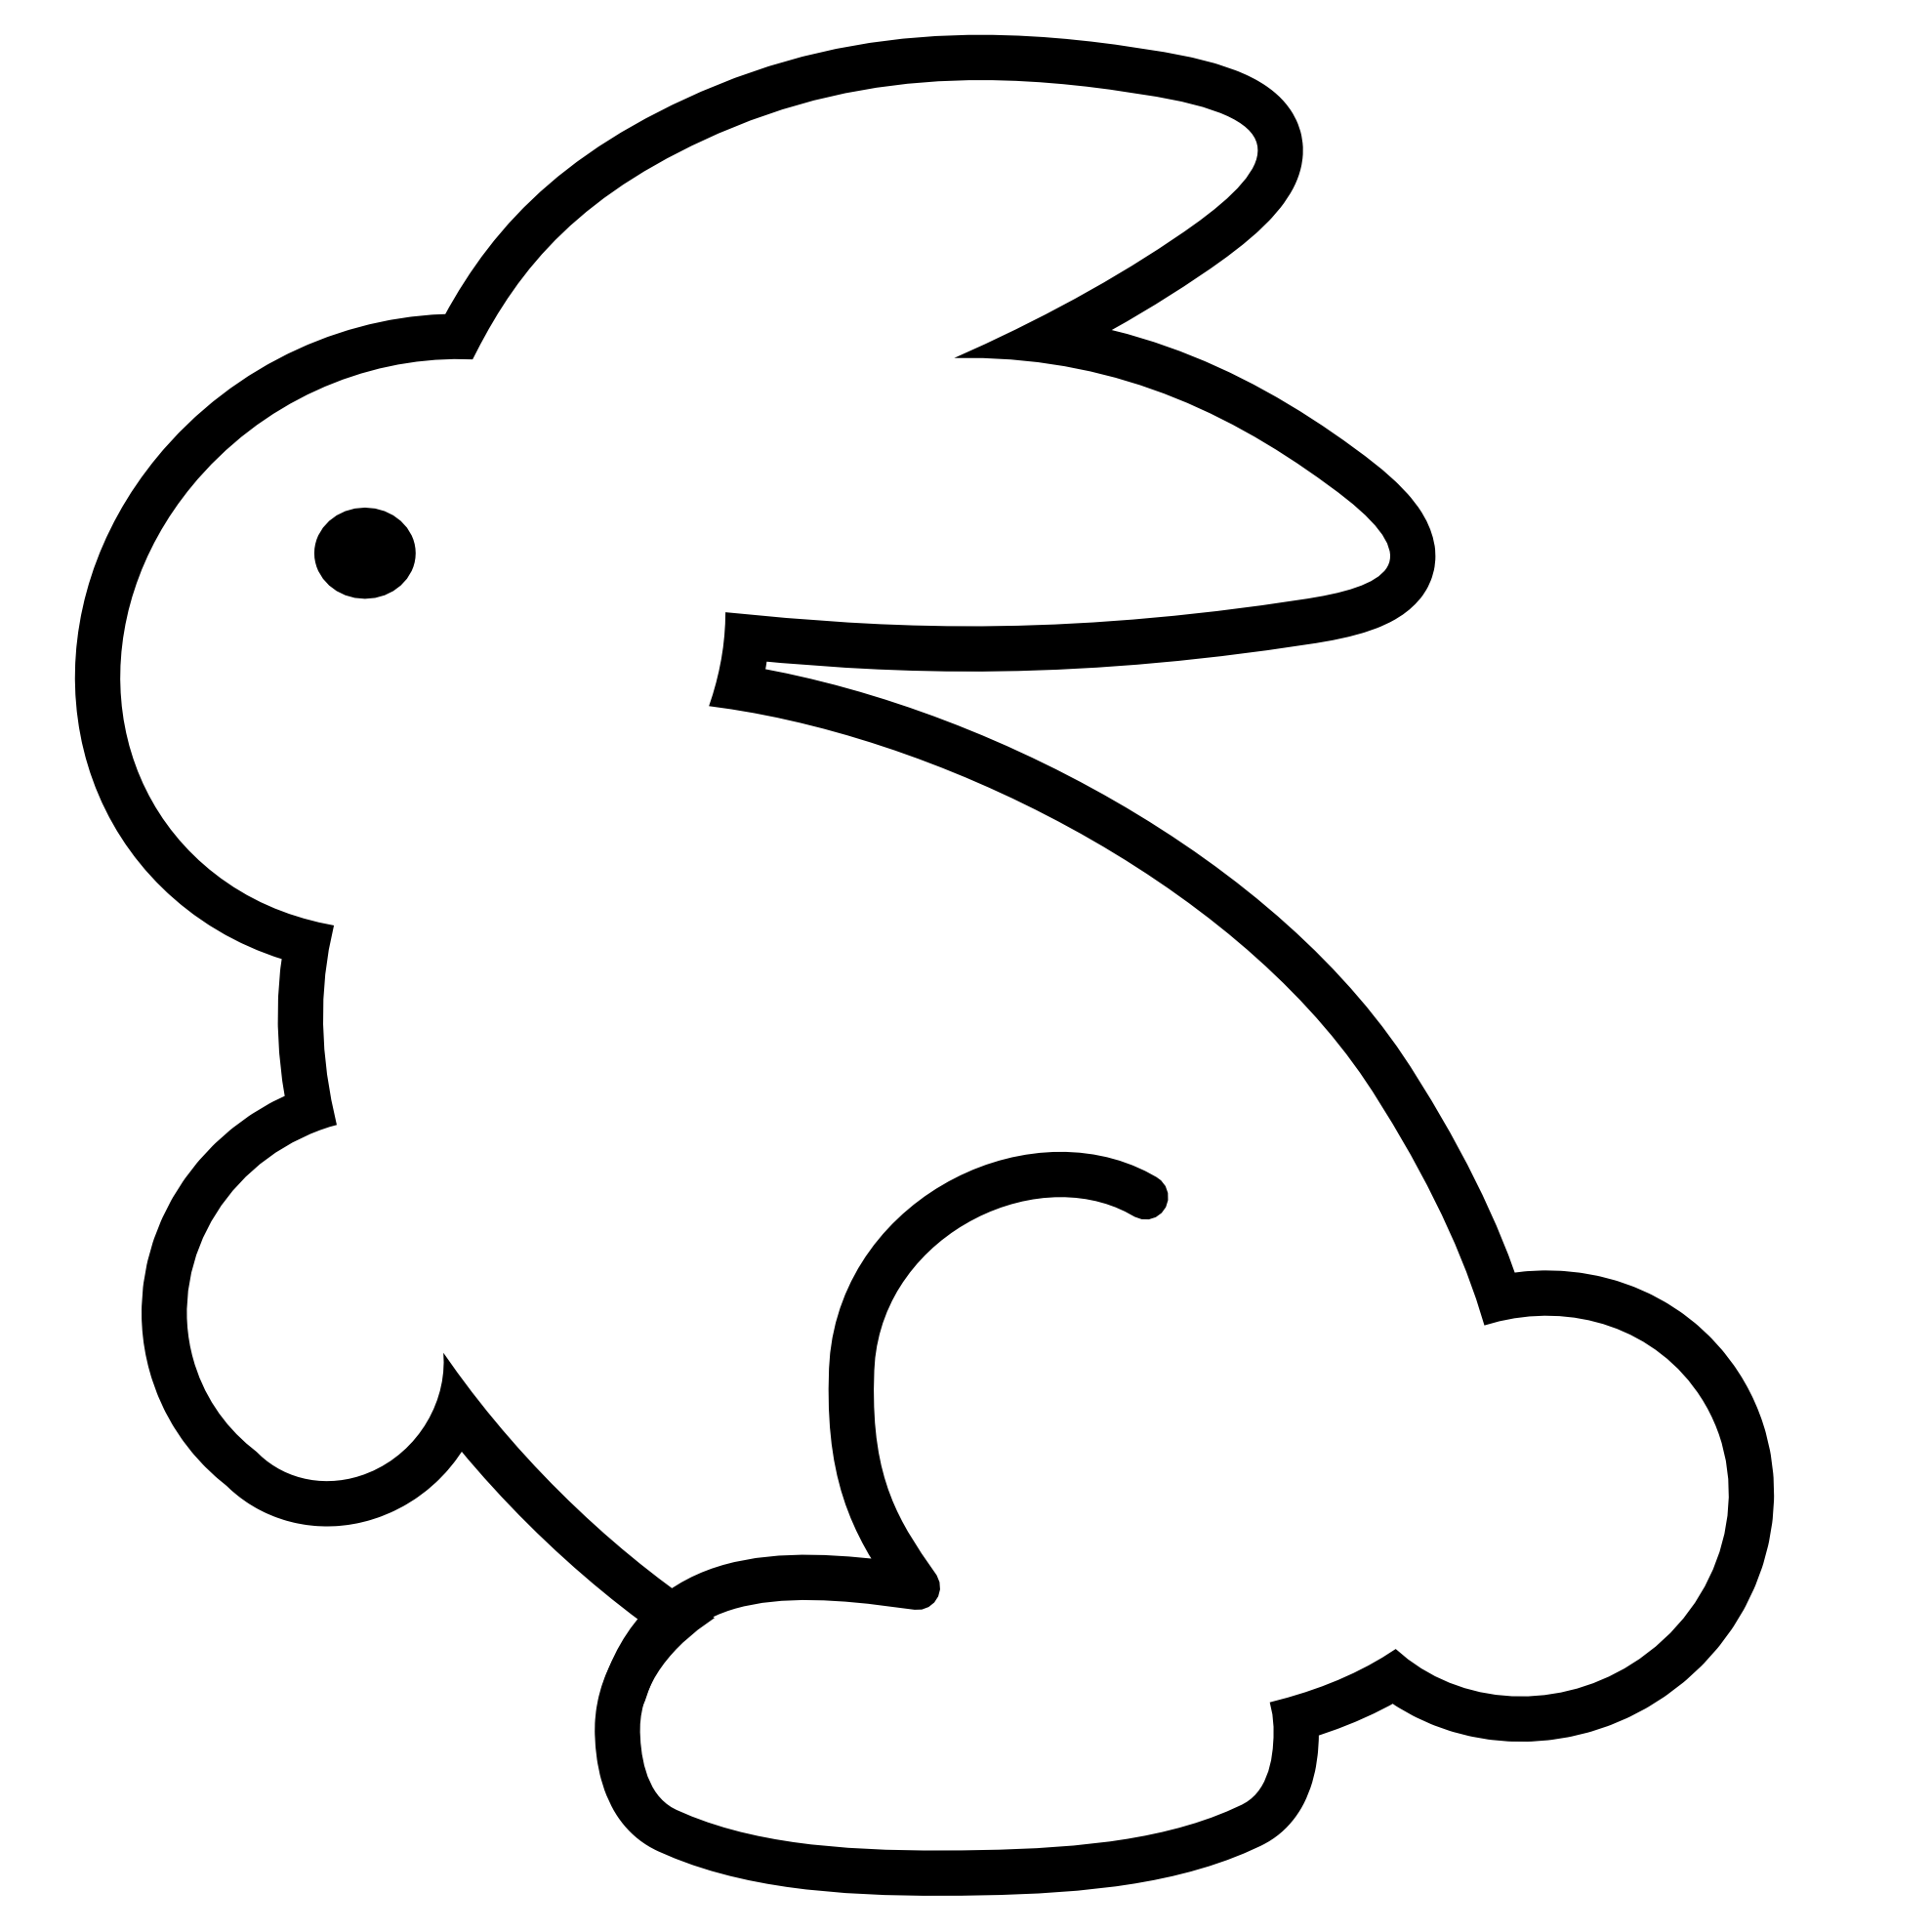 Rabbit  black and white rabbit clipart black and white free images